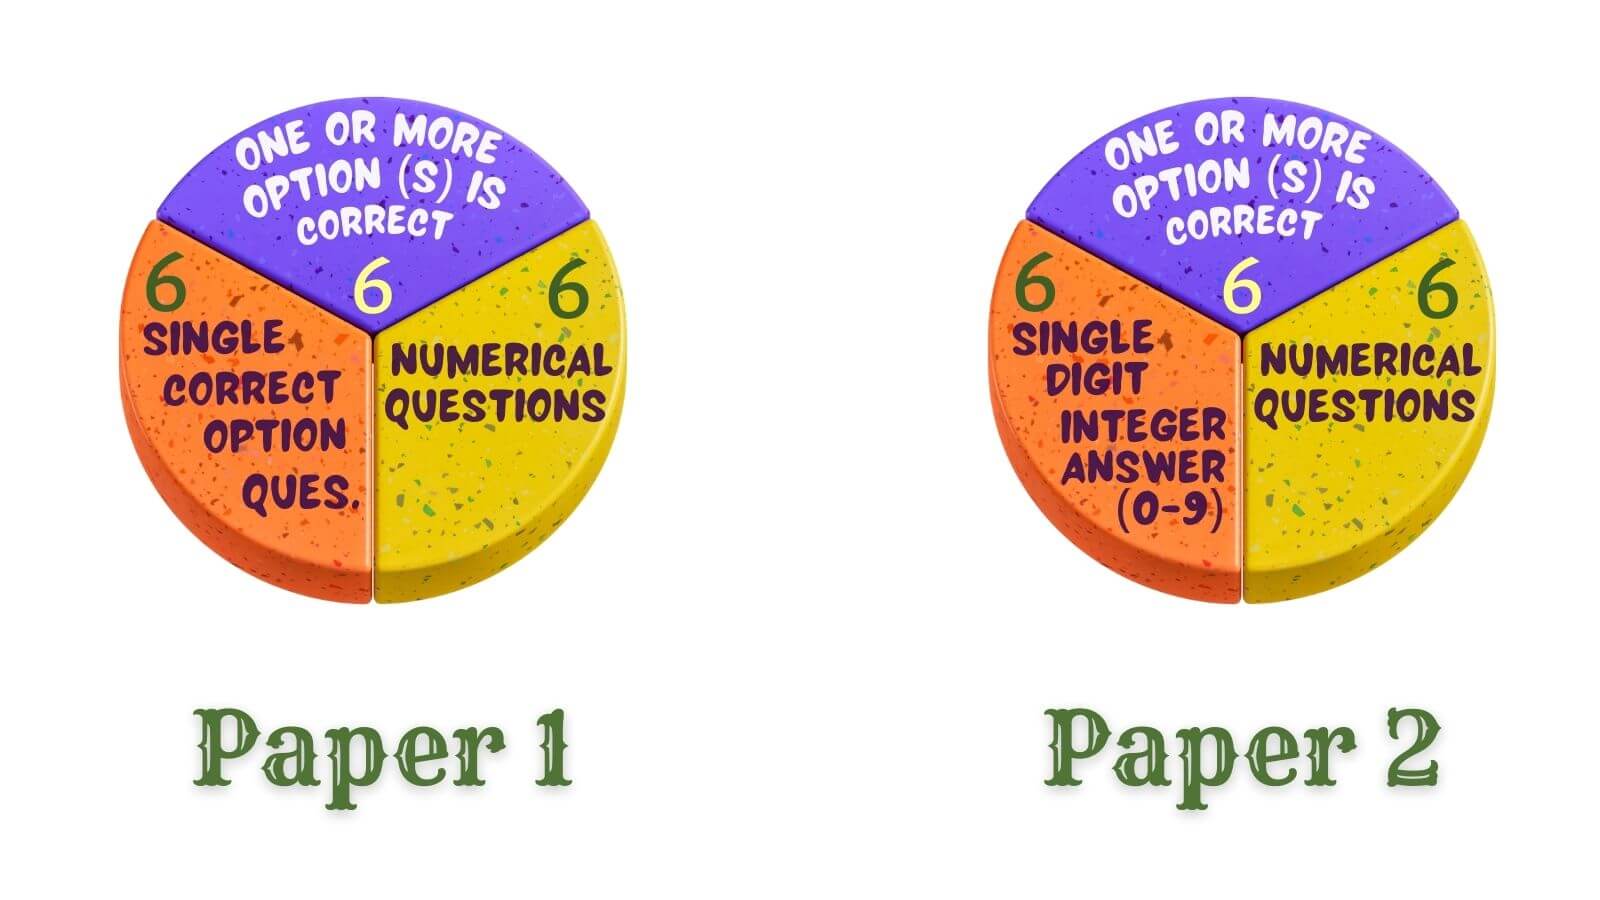 iit jee advanced paper 1 and 2 pattern in pie chart